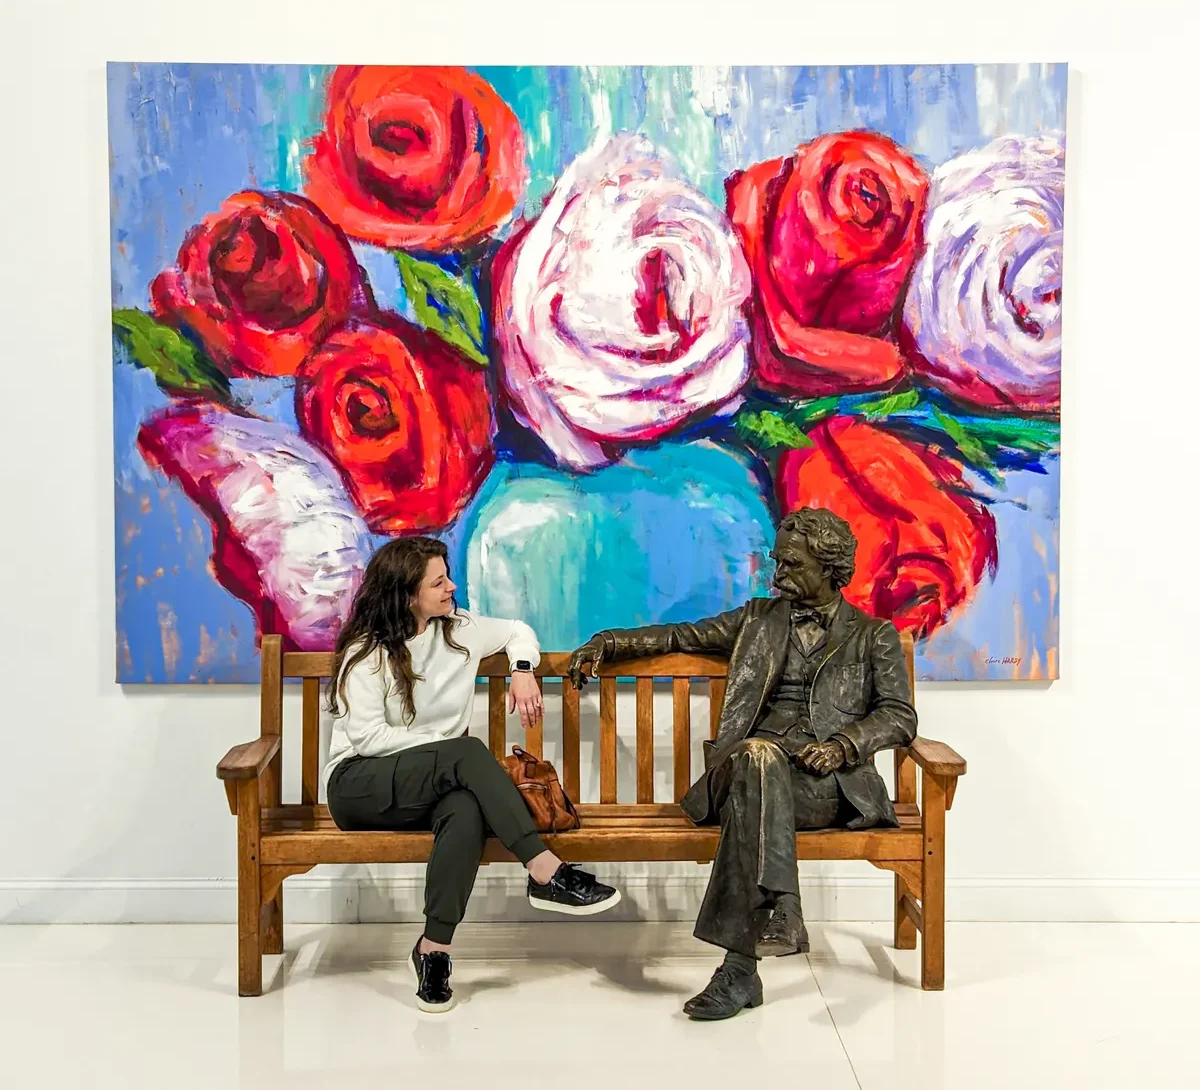 Sit next to a sculpture of Mark Twain and enjoy "Rose Ceremony Bouquet" by Claire Hardy 